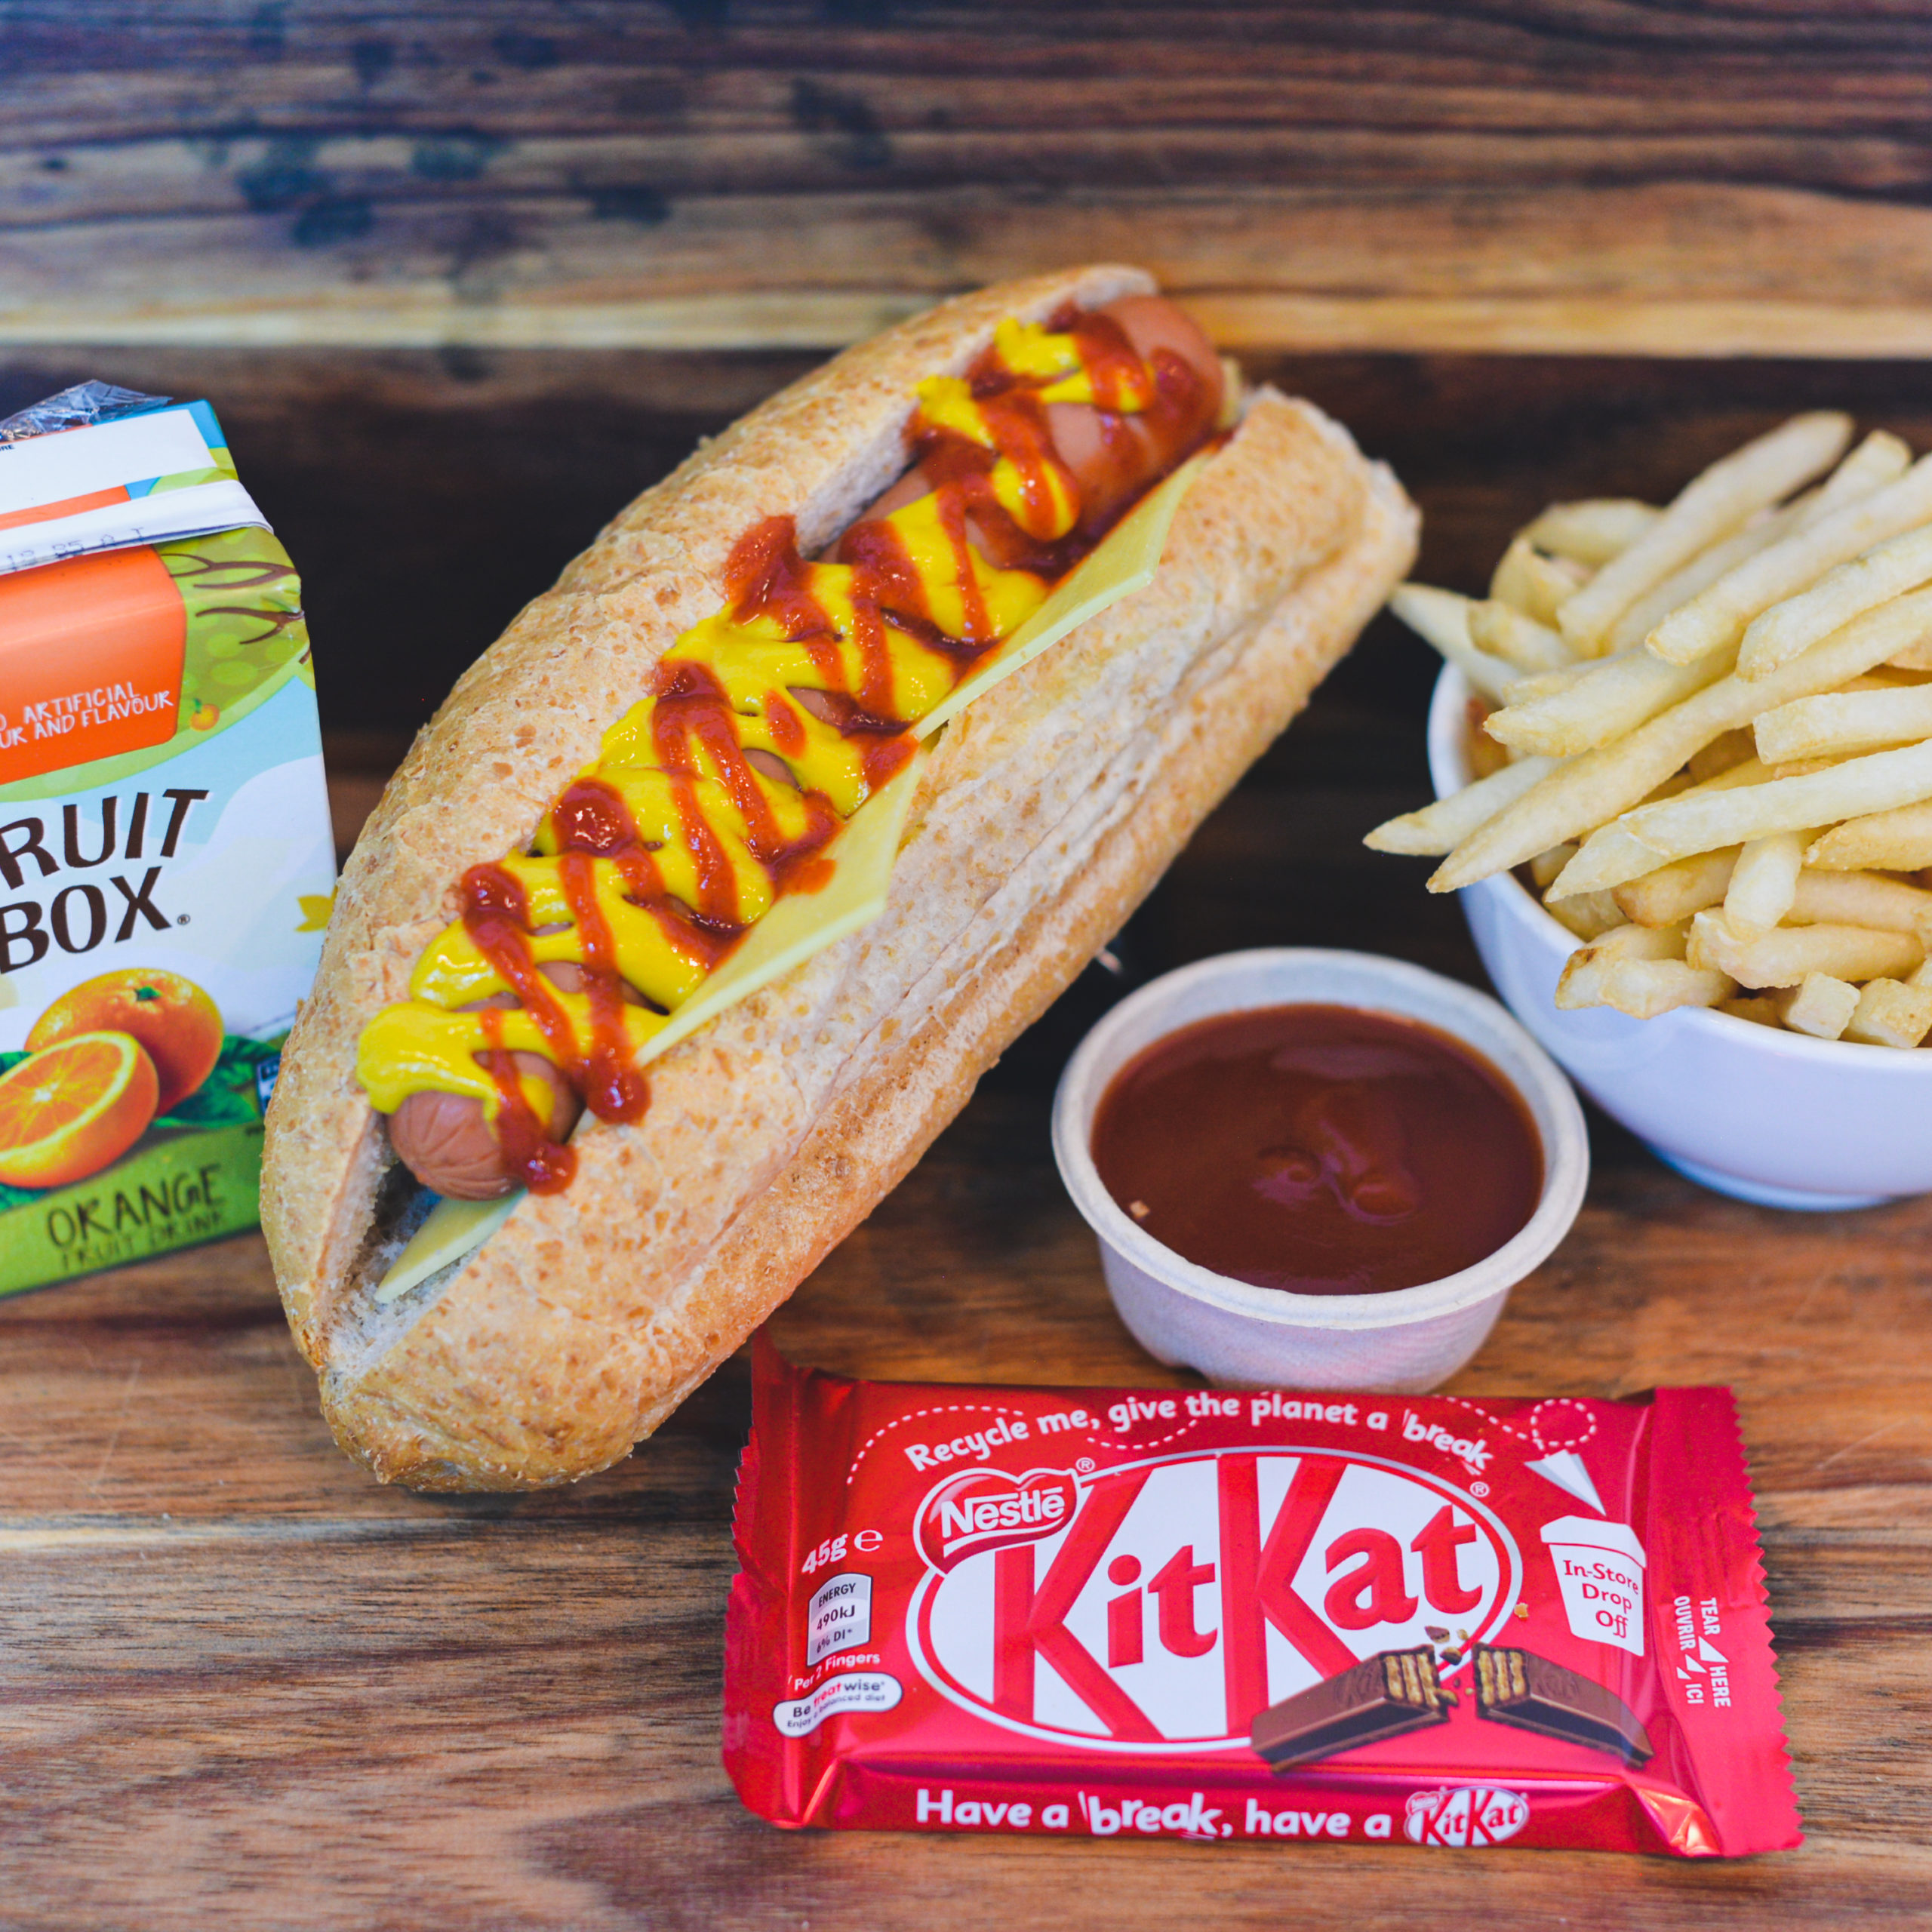 Hot Dog, Large French Fries, sauce, chocolate bar and juice ($50.00)